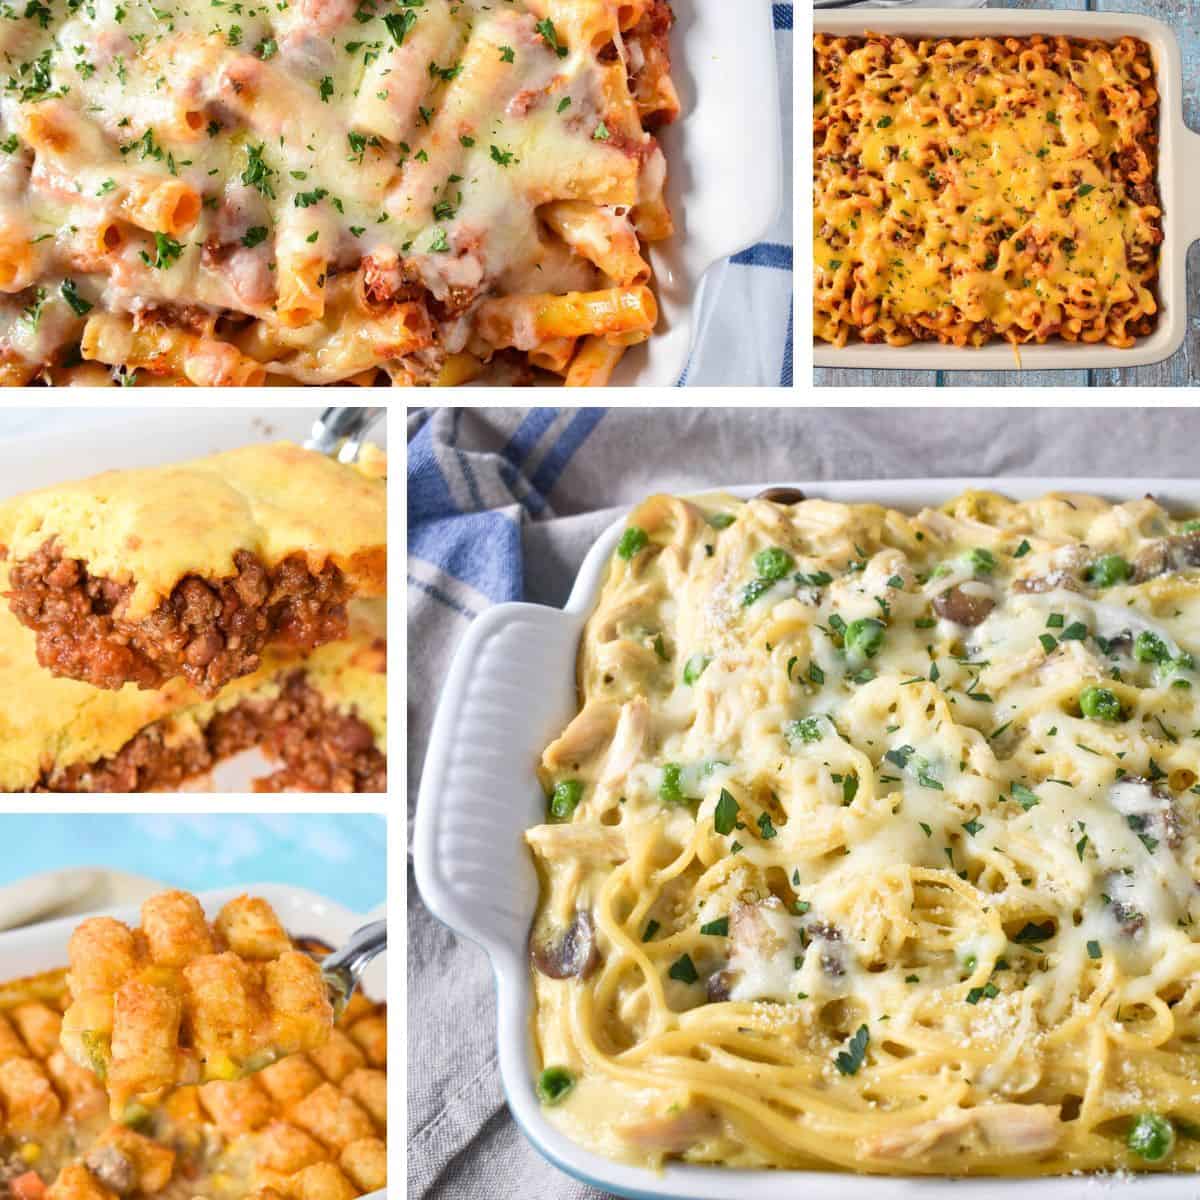 A collage of 5 pictures of casseroles featured in the post.